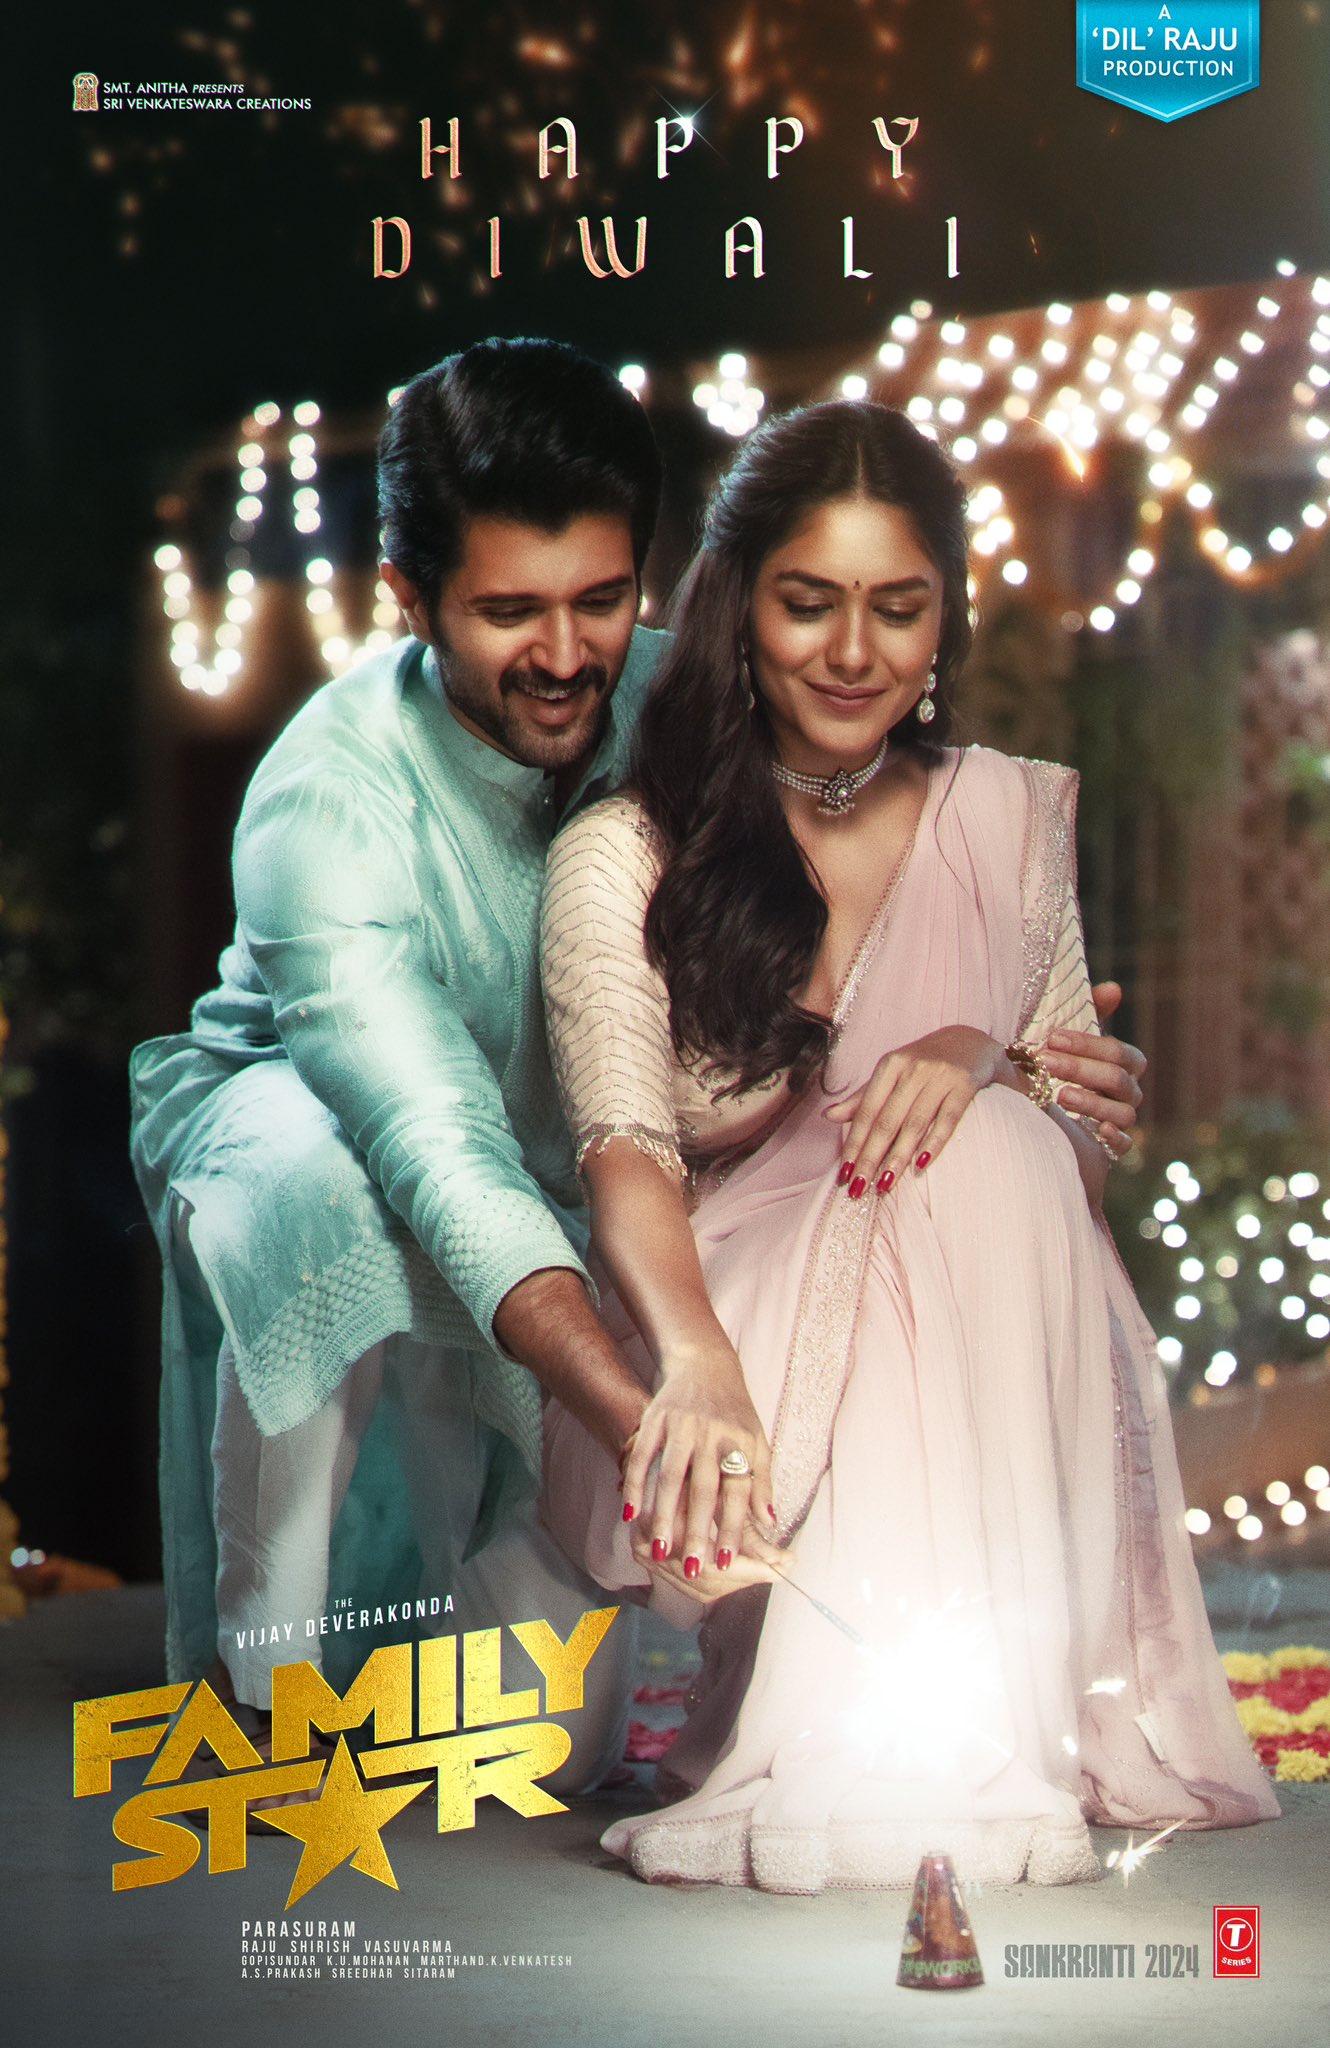 Family Star (Telugu) - April 5Family Star brings together the dynamic duo of Vijay Deverakonda and Mrunal Thakur in a delightful family drama directed by Parasuram Petla. The film promises a blend of fun and romance as Deverakonda's working-class hero encounters Thakur's character, sparking a series of heartwarming and entertaining moments.